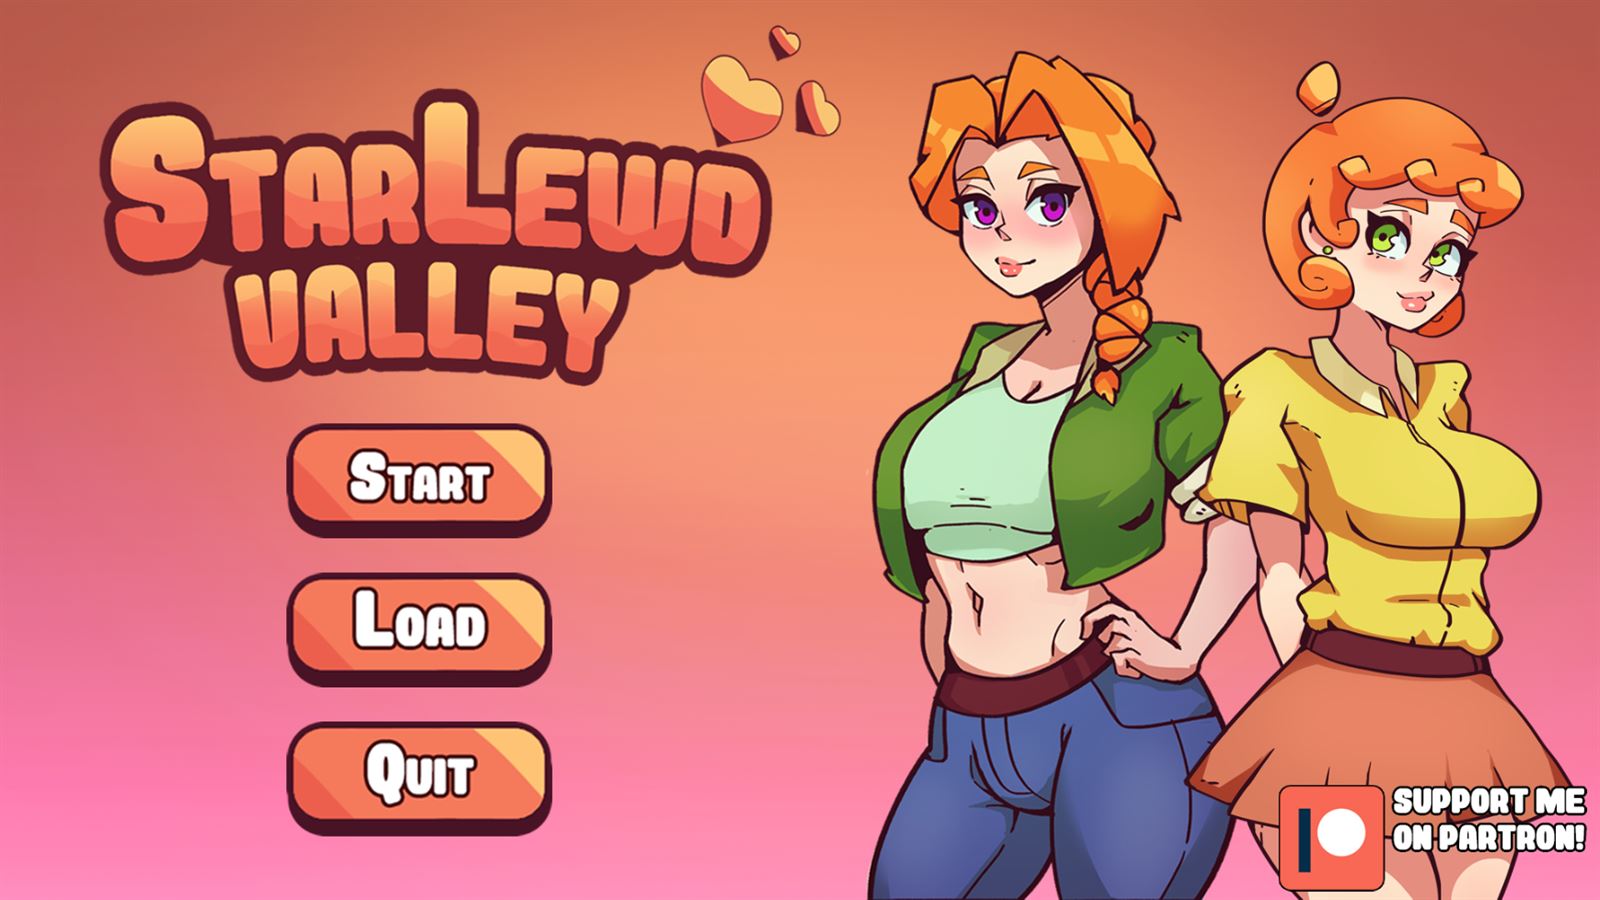 Starlewd Valley porn xxx game download cover